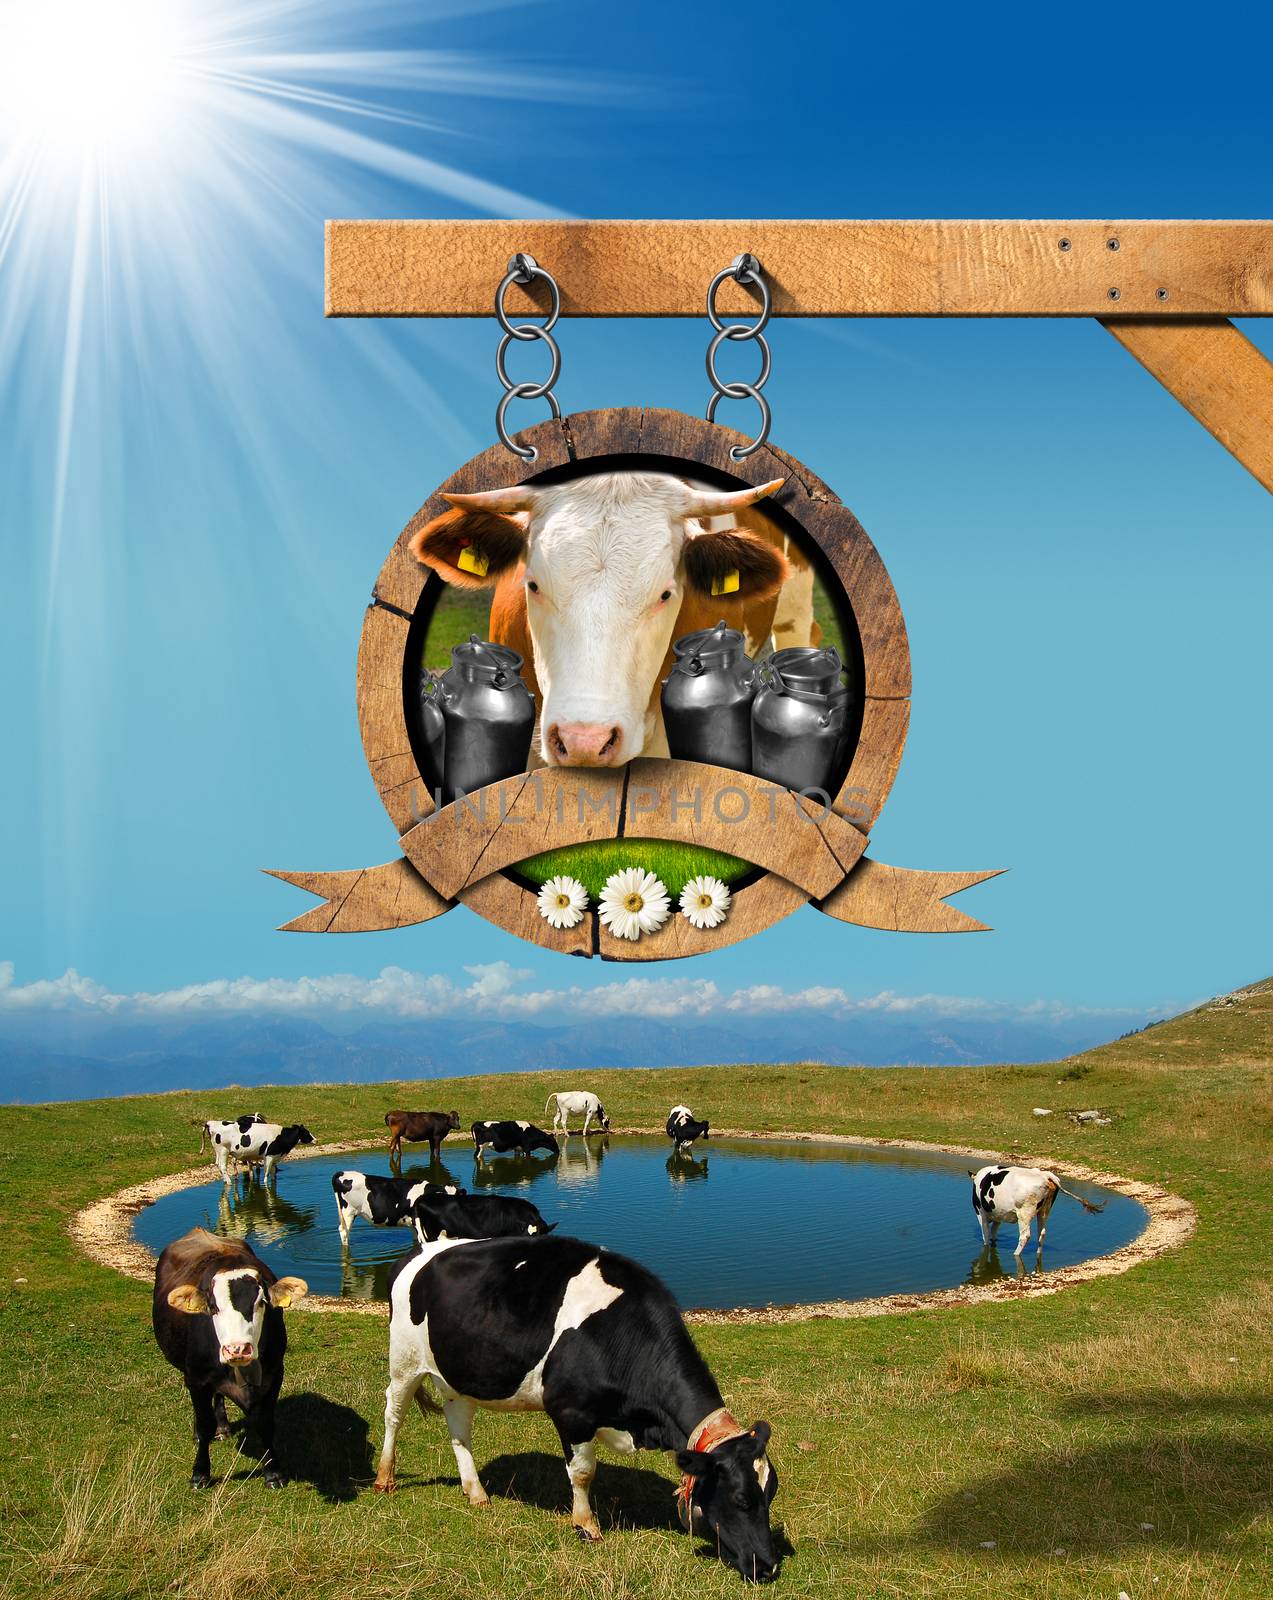 Dairy products sign with head of cow, cans of milk, green grass and daisy flowers. Hanging from a metal chain, on mountain landscape with grazing cows